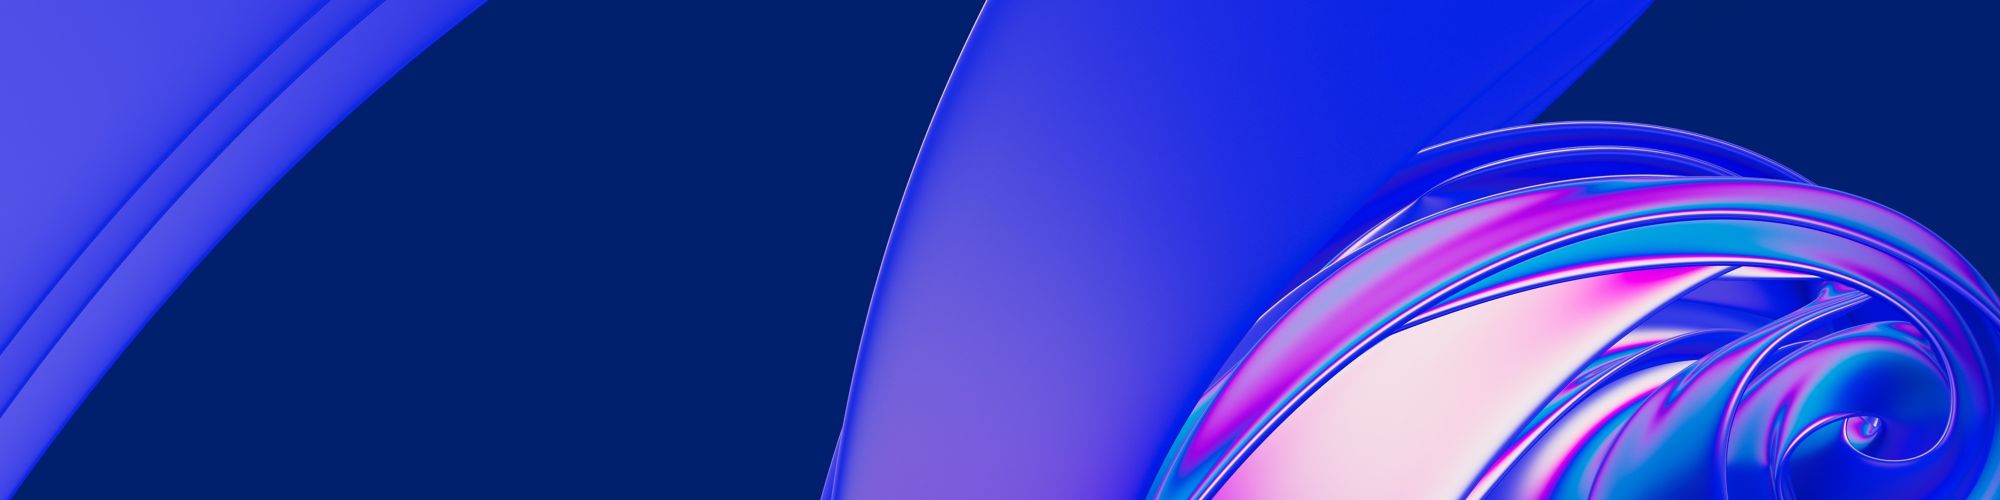 id-abstract-blue-navy-blue-wave-background